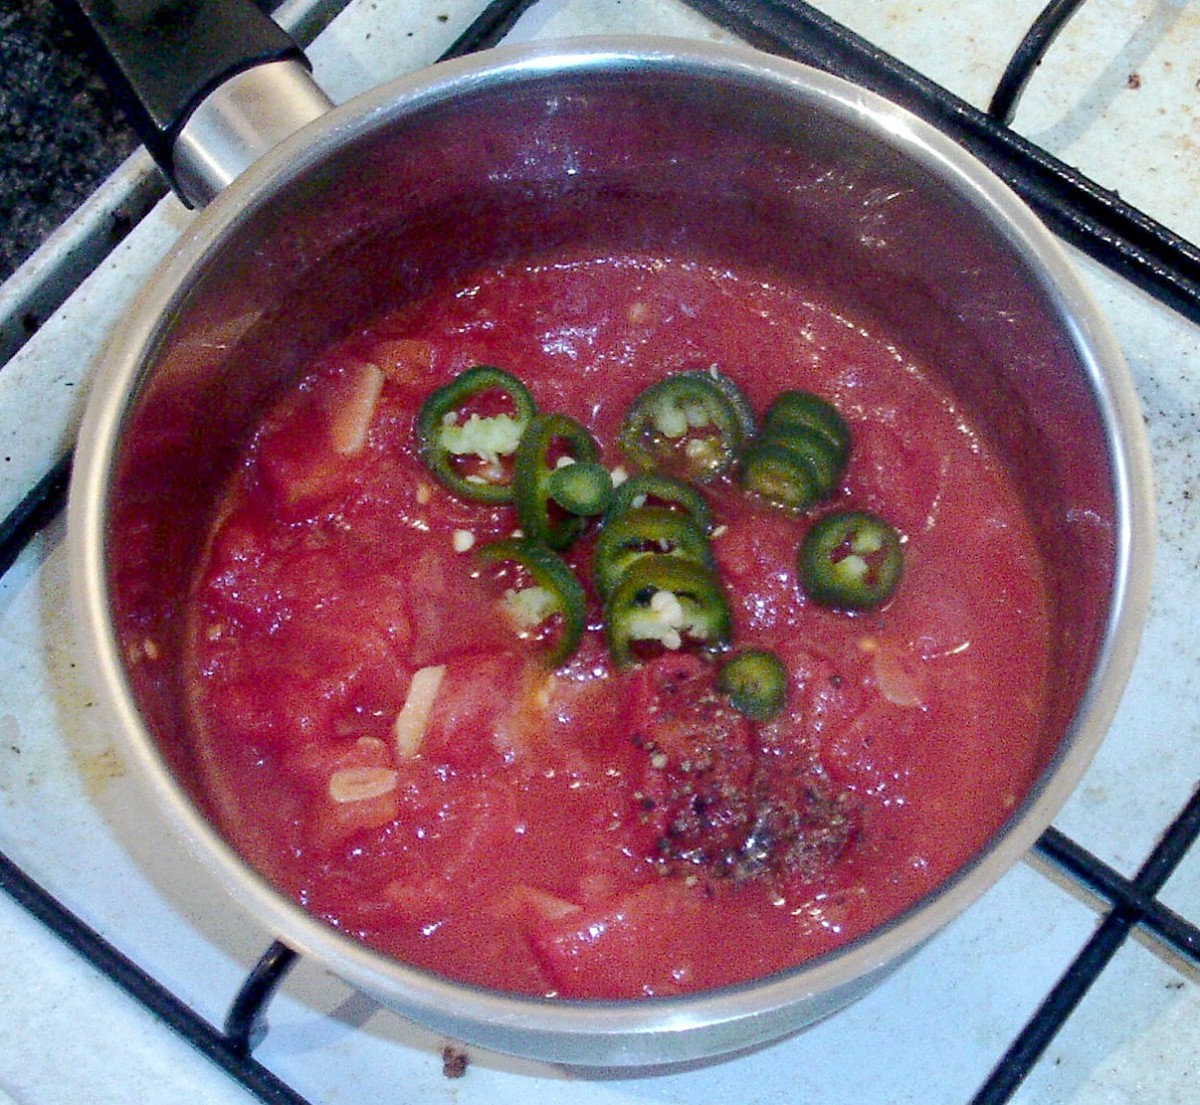 Sliced chilli and seasonings are added to saucepan.